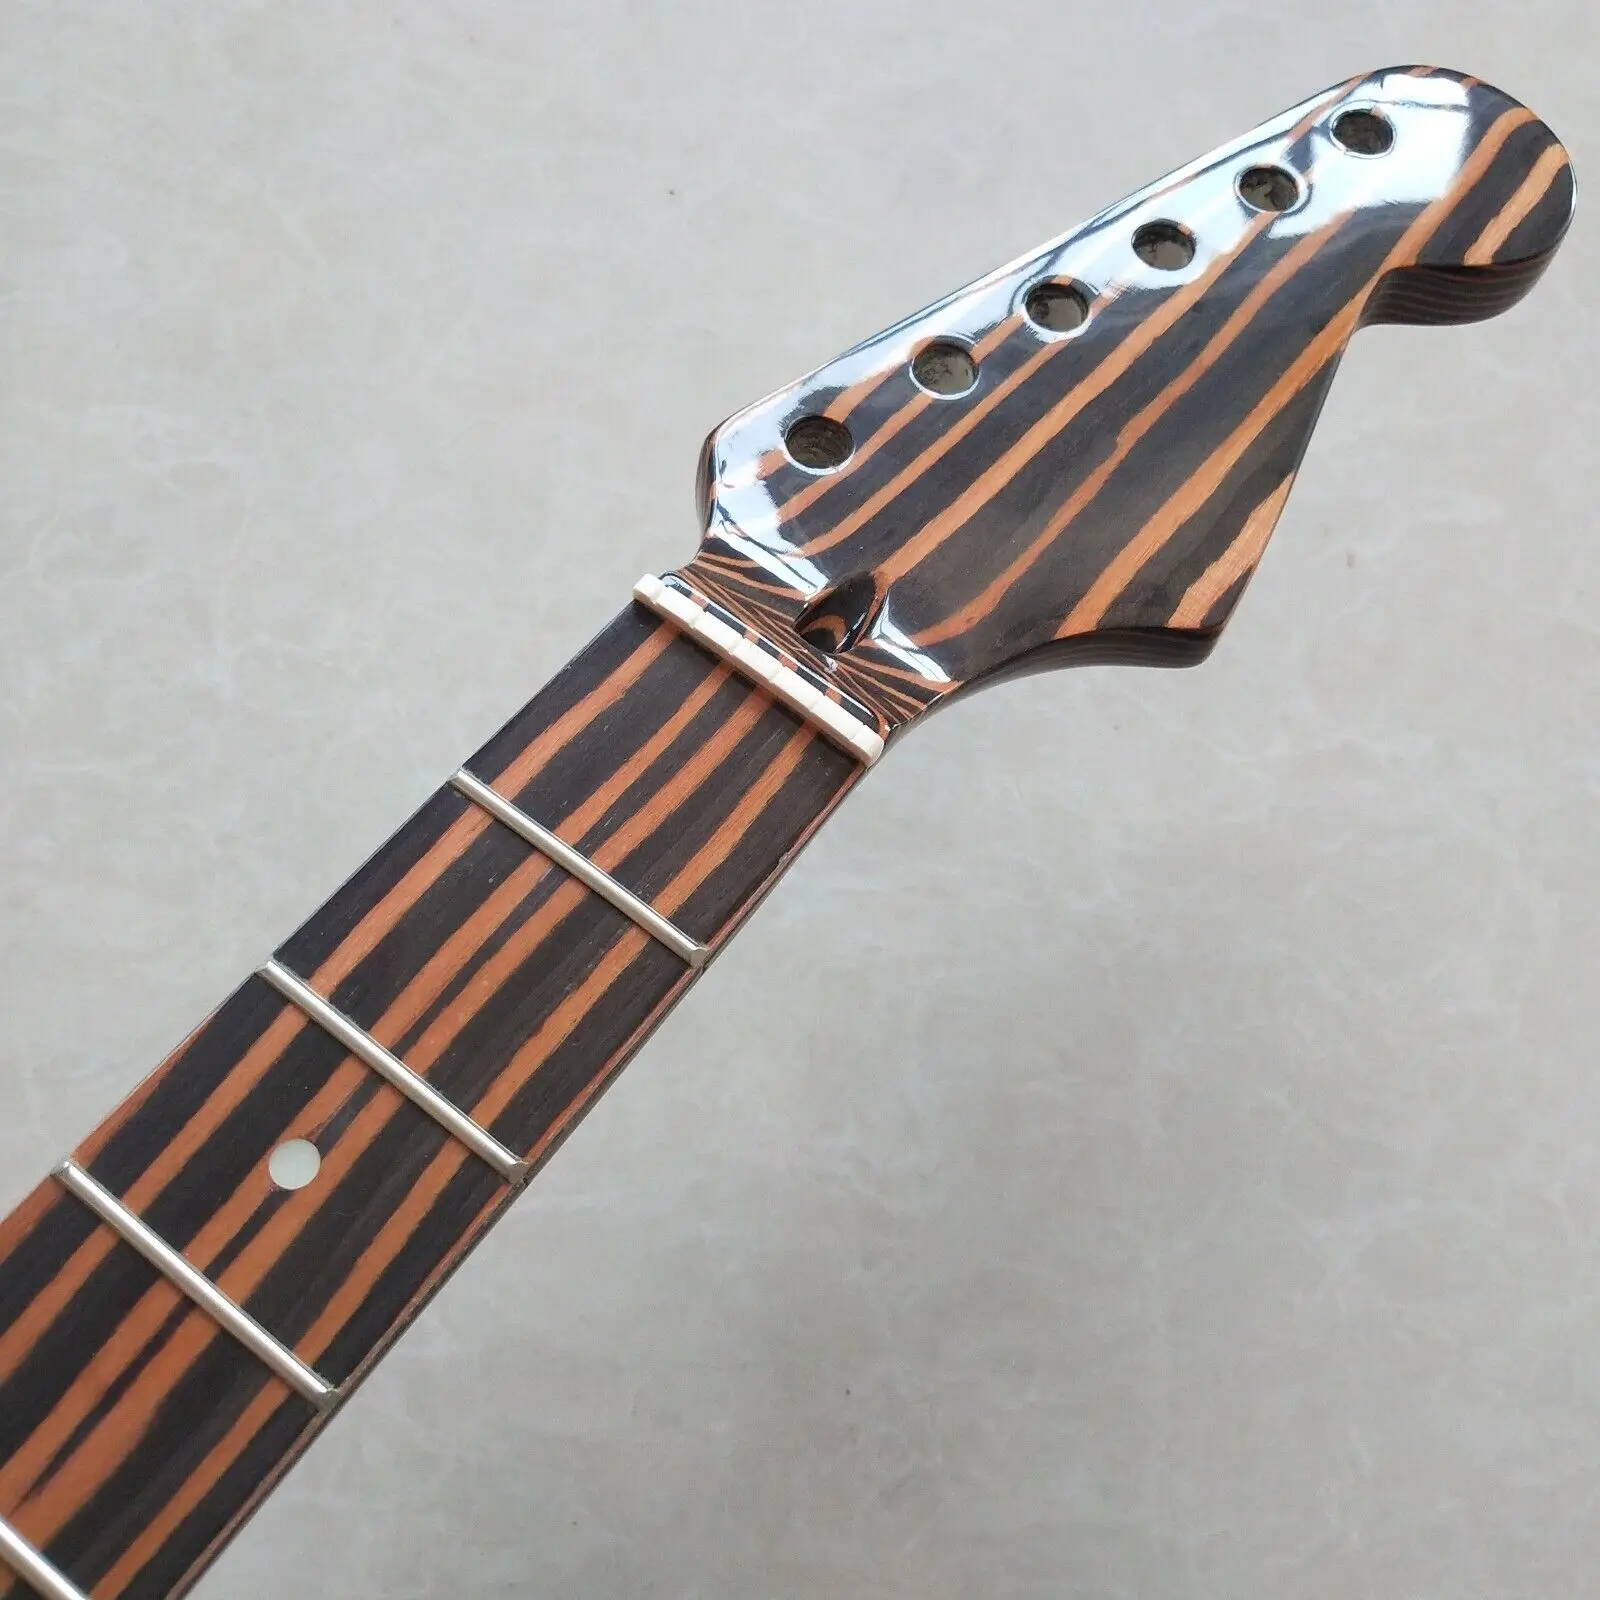 Enlarge 22 Frets Gloss Zebra wood Electric Guitar Neck 25.5in Fretboard dots inlay parts